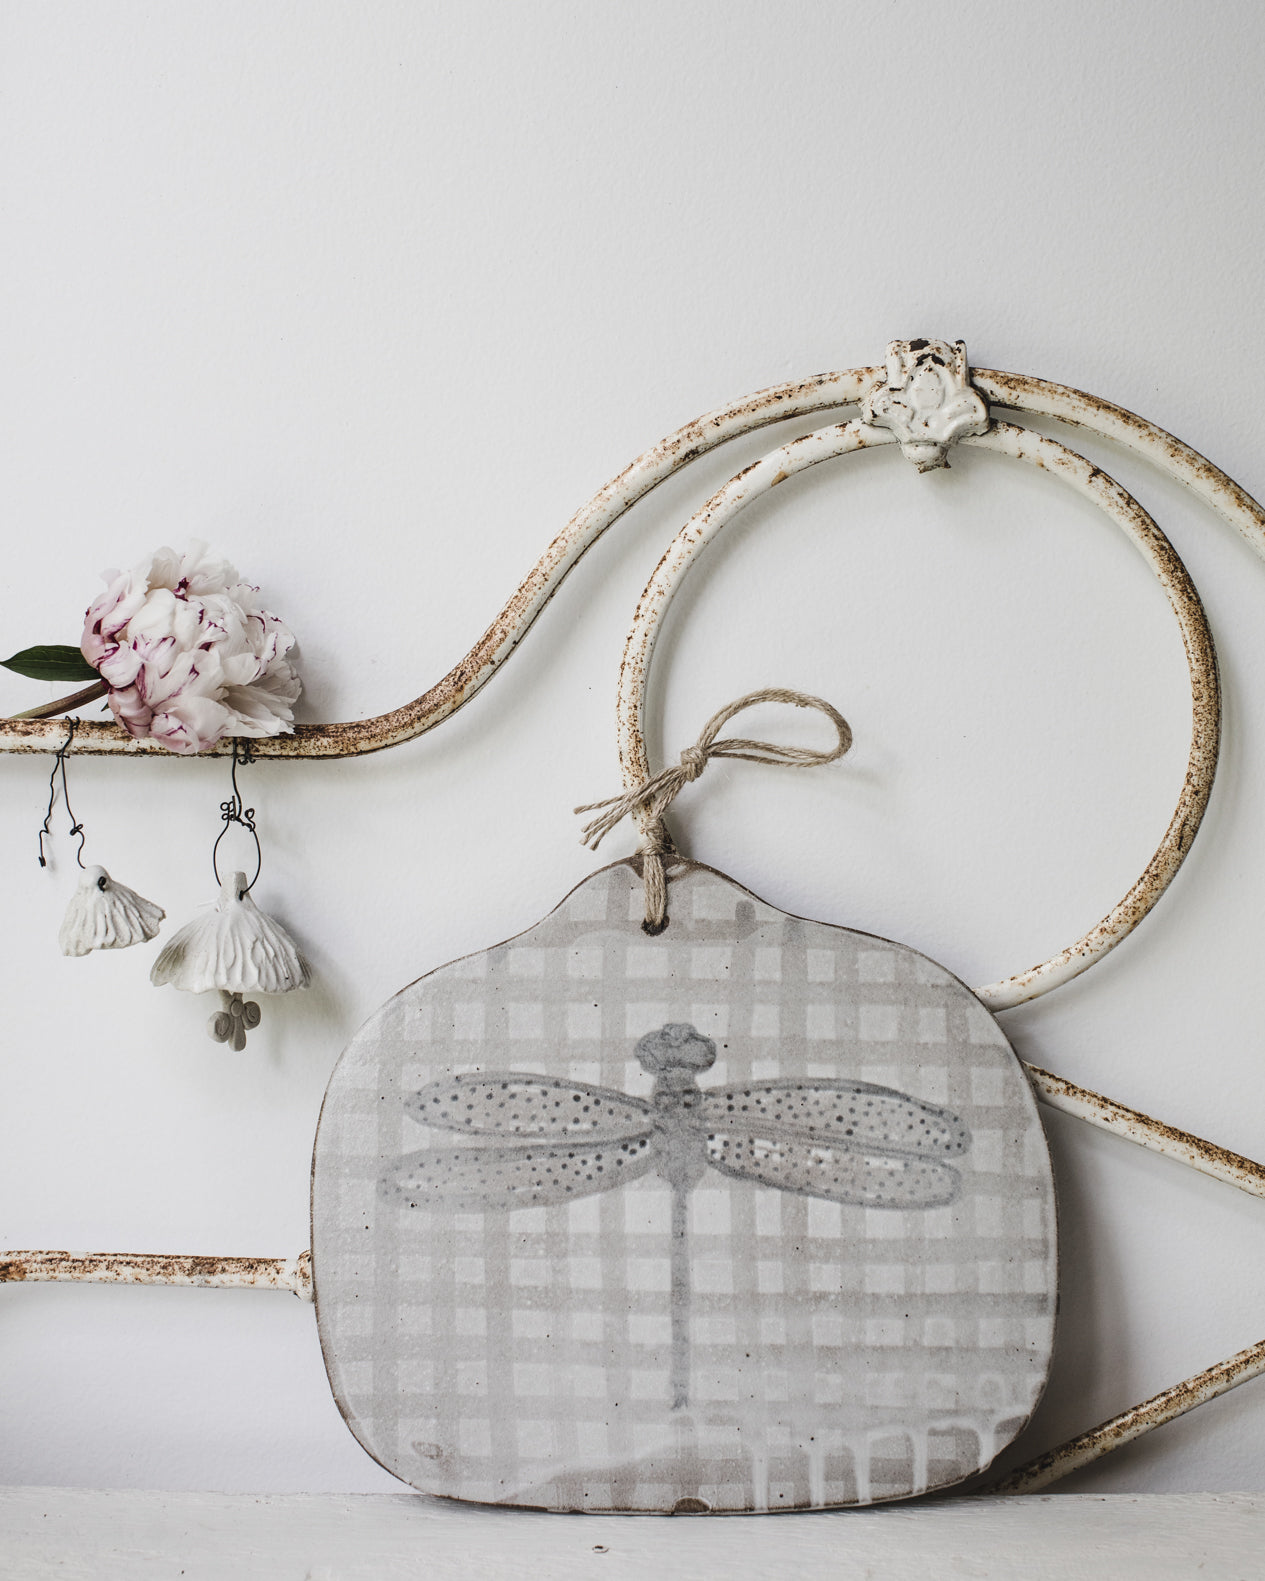 Dragonfly cheeseboard with jute cord handmade by clay beehive ceramics